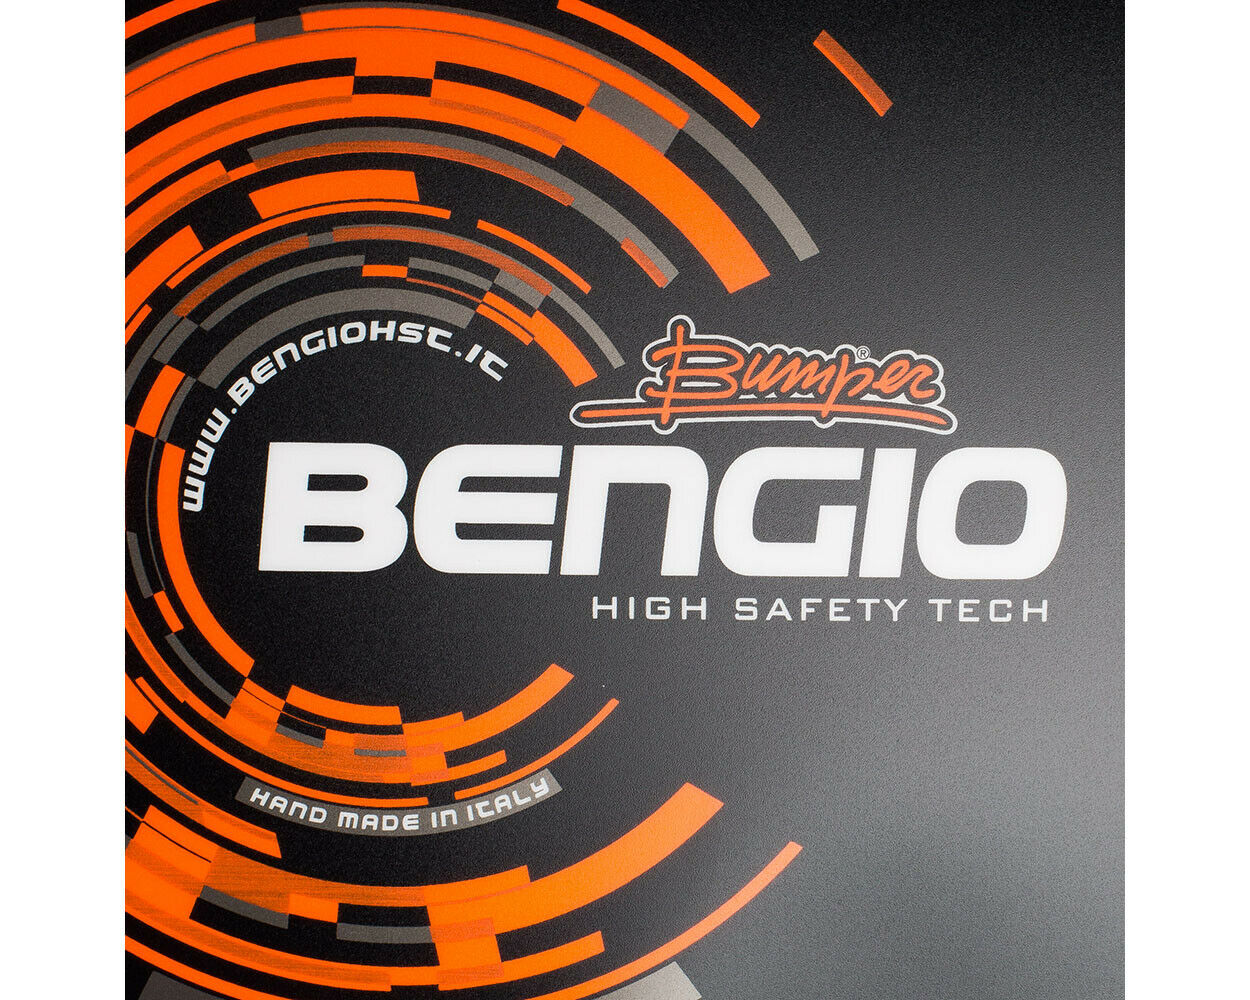 Bengio Bumper High Quality Rib Protector in All Sizes and colours